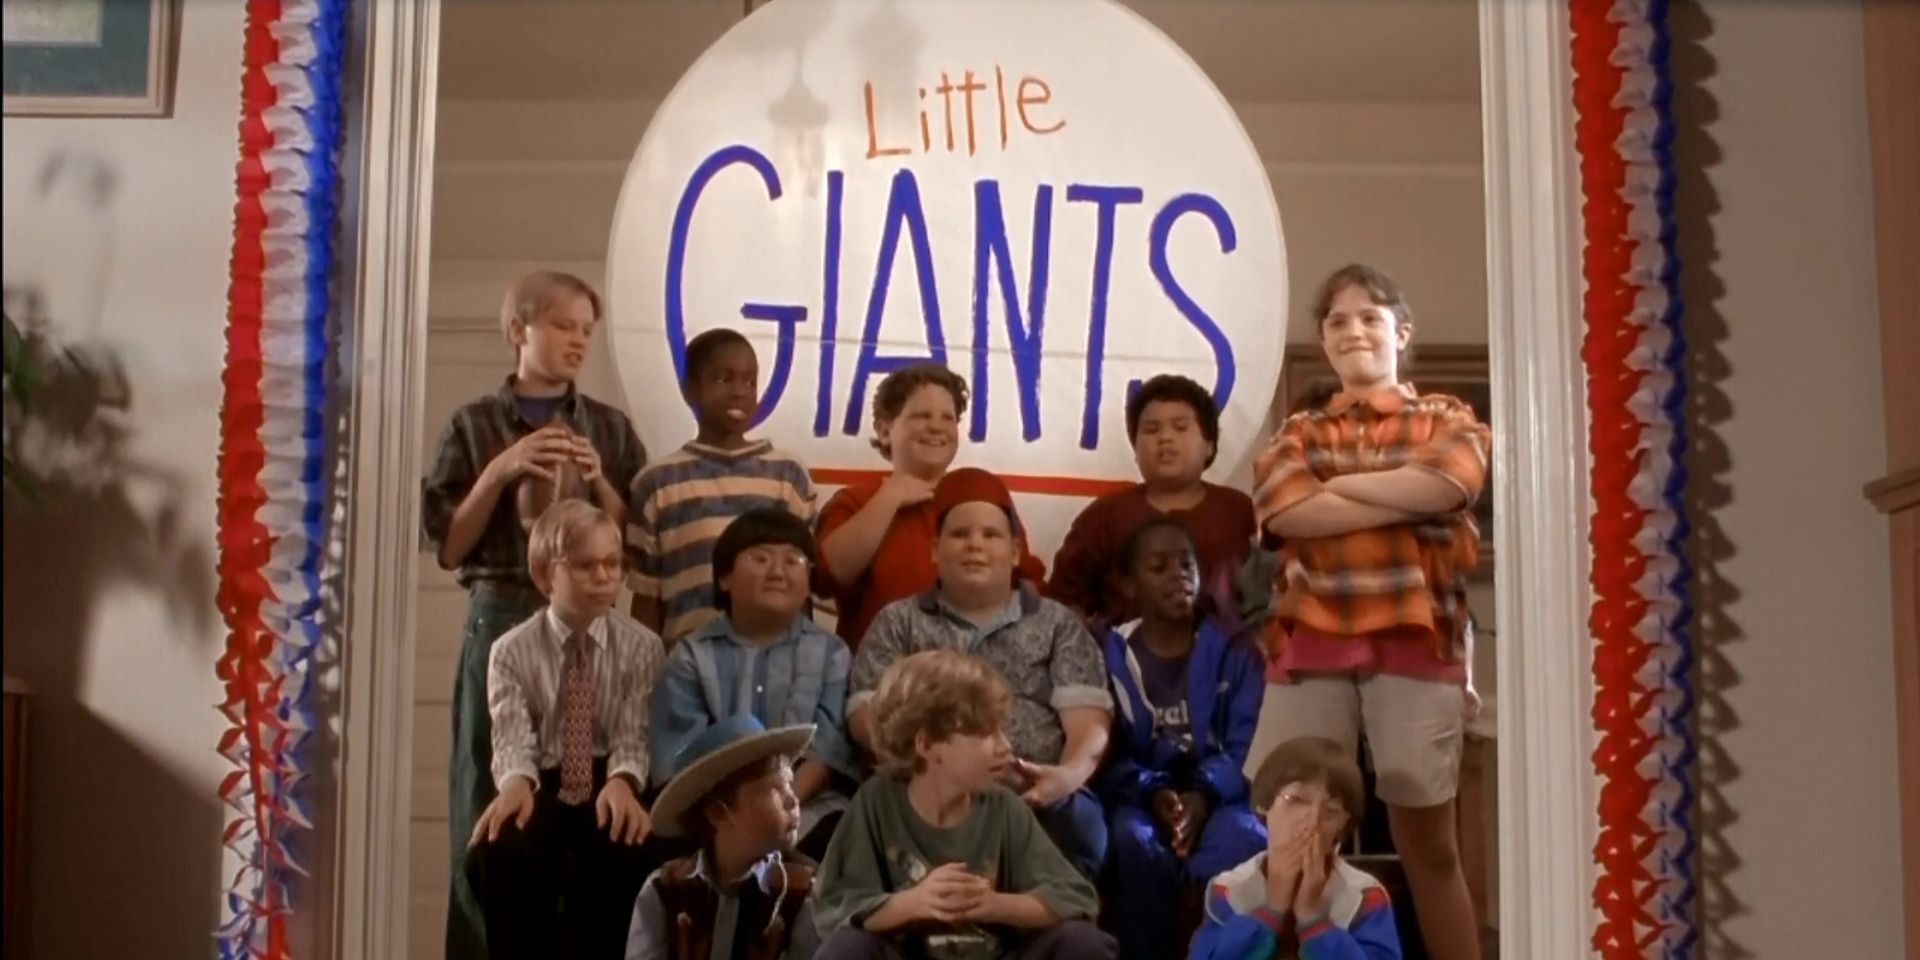 The 10 Best Sports Movies for Kids Ranked According To IMDb